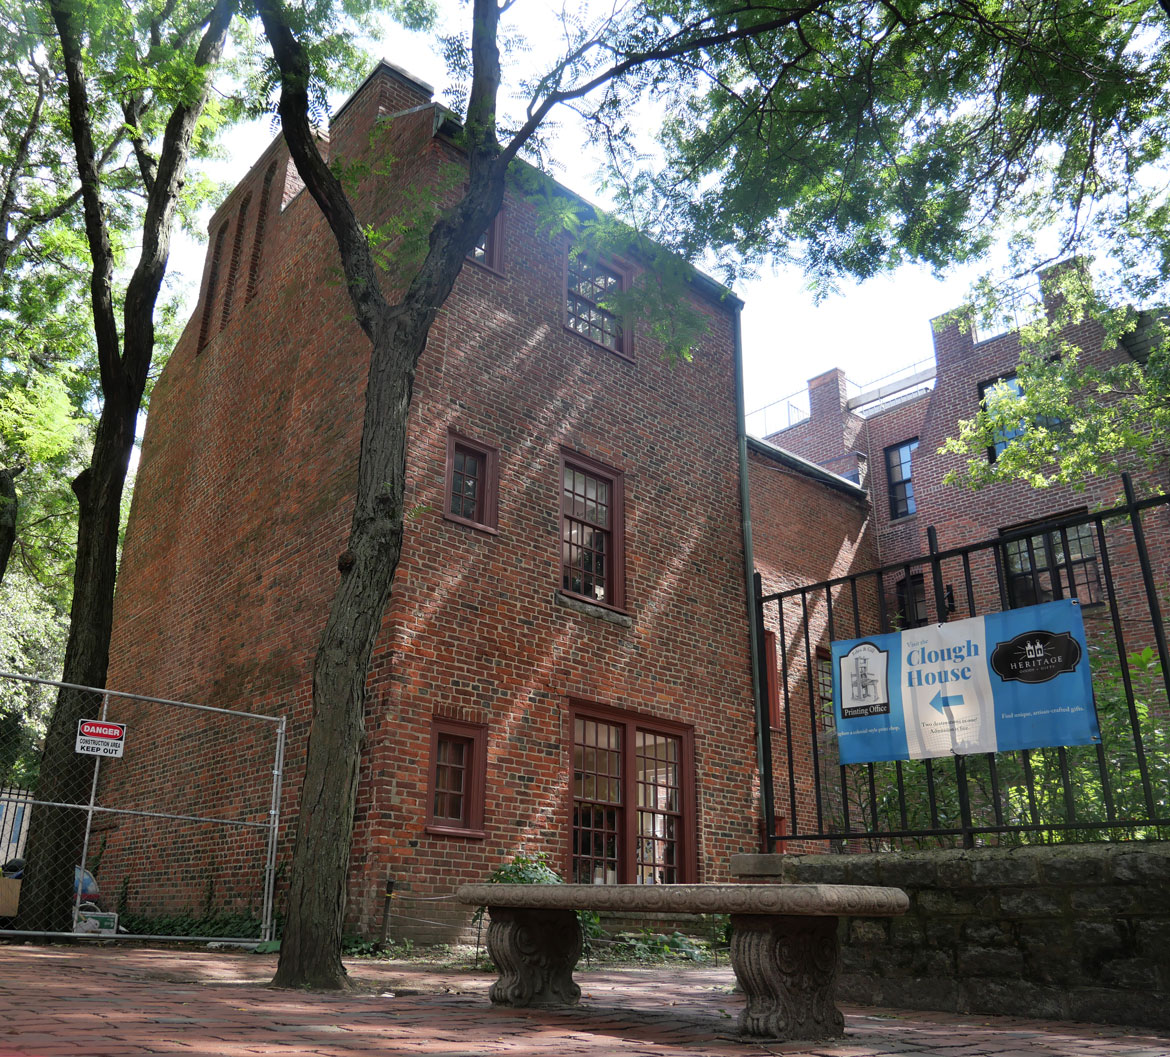 The 1715 Clough House o the campus of Boston's Old North Church, Aug. 13, 2023. (©Greg Cook photo)